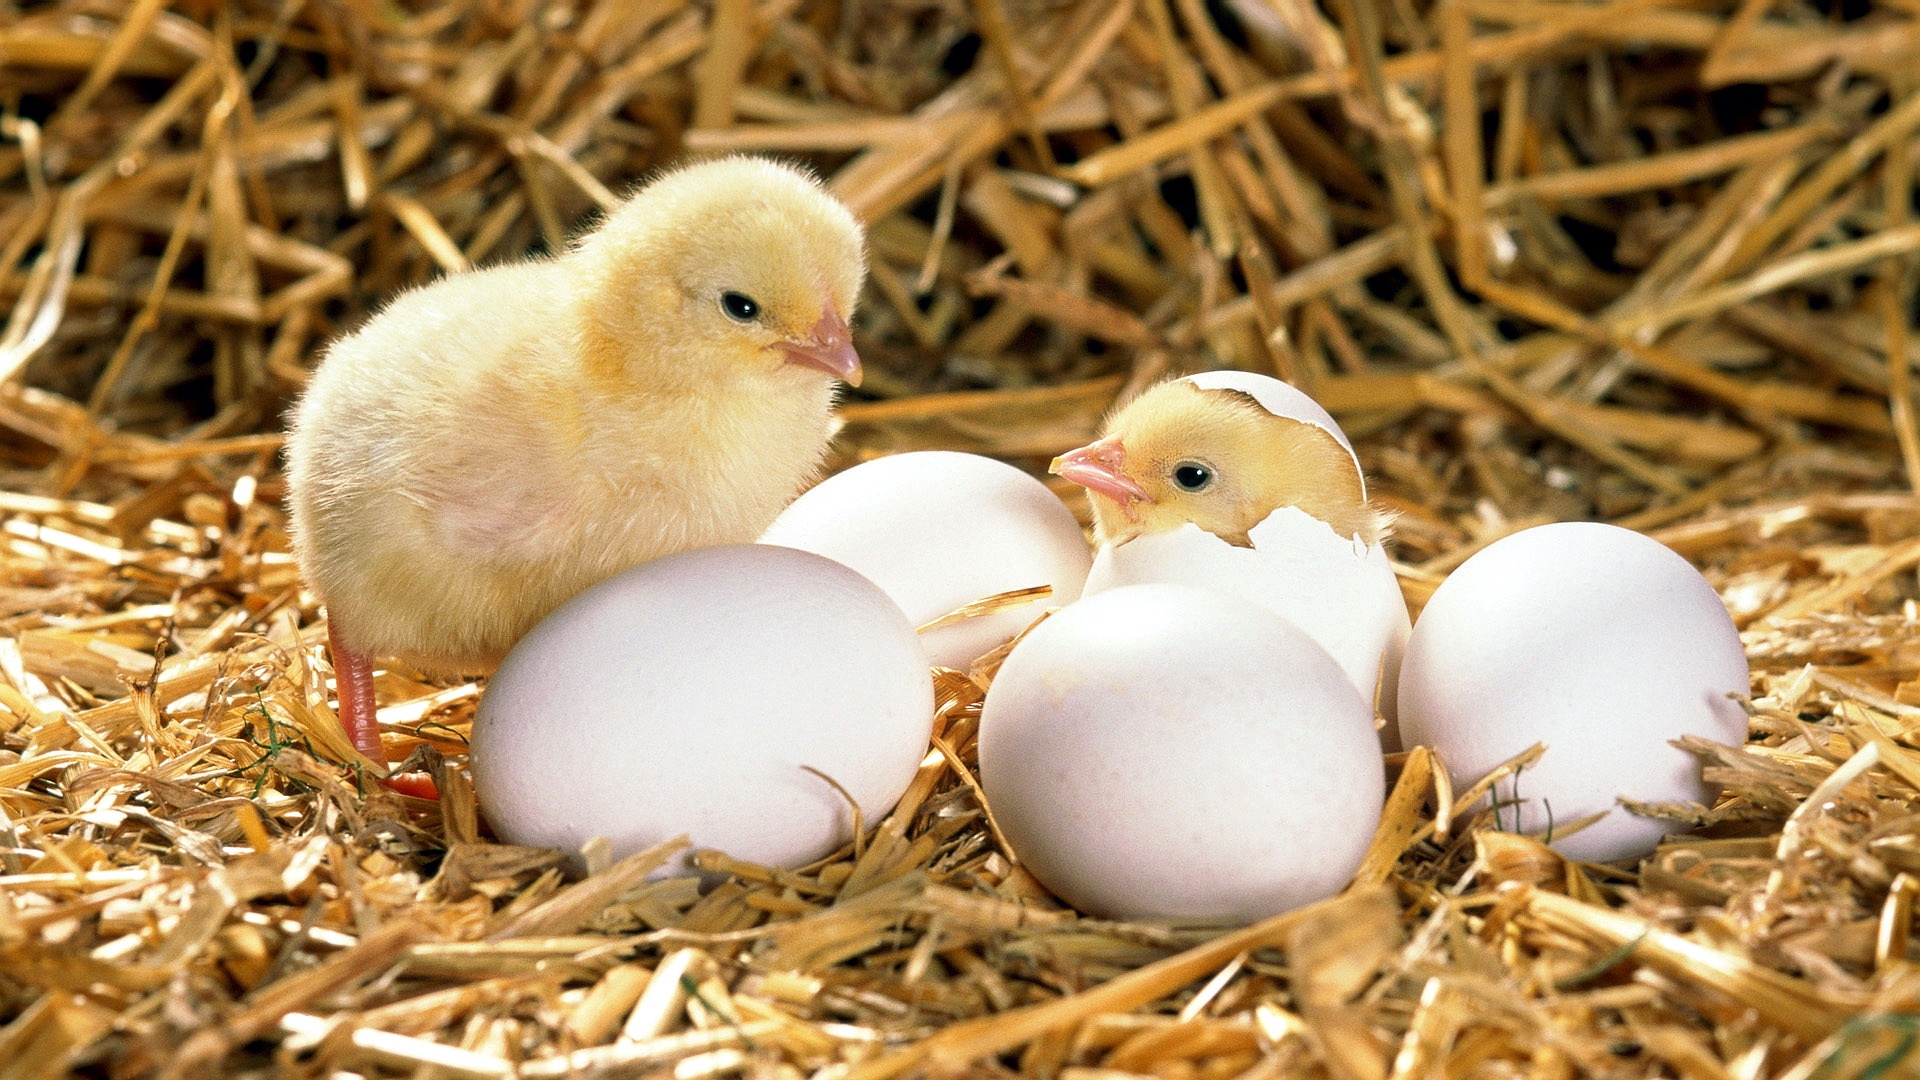 Wallpaper Chicken, Eggs, Shell, Hatched, Hay - Chicks And Eggs - HD Wallpaper 